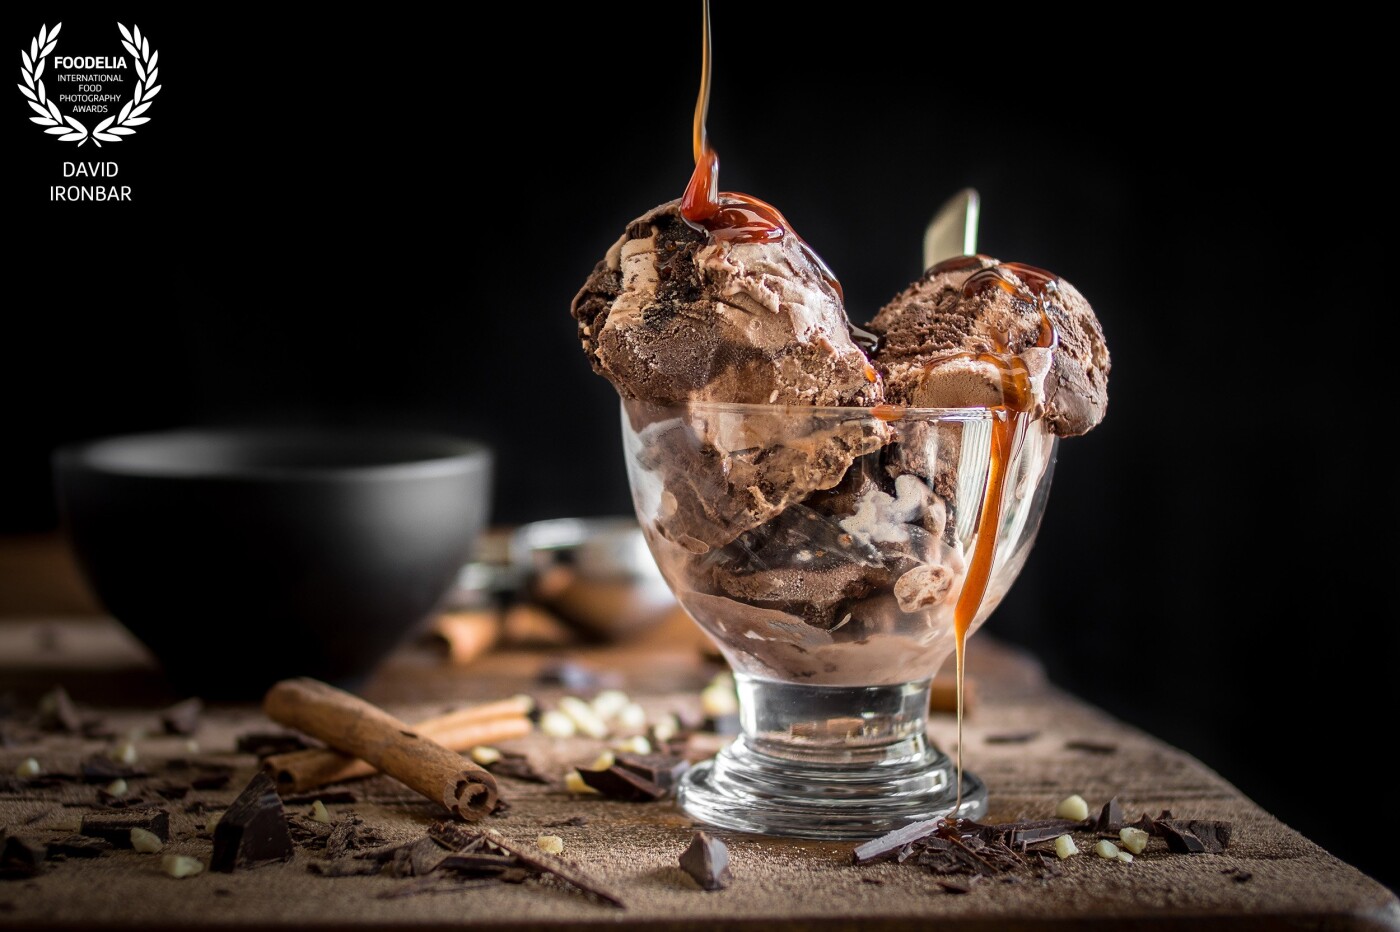 This no-churn triple chocolate ice cream is so rich and dense, with a sprinkle of chopped nuts and chocolate sauce. Taken in natural light.